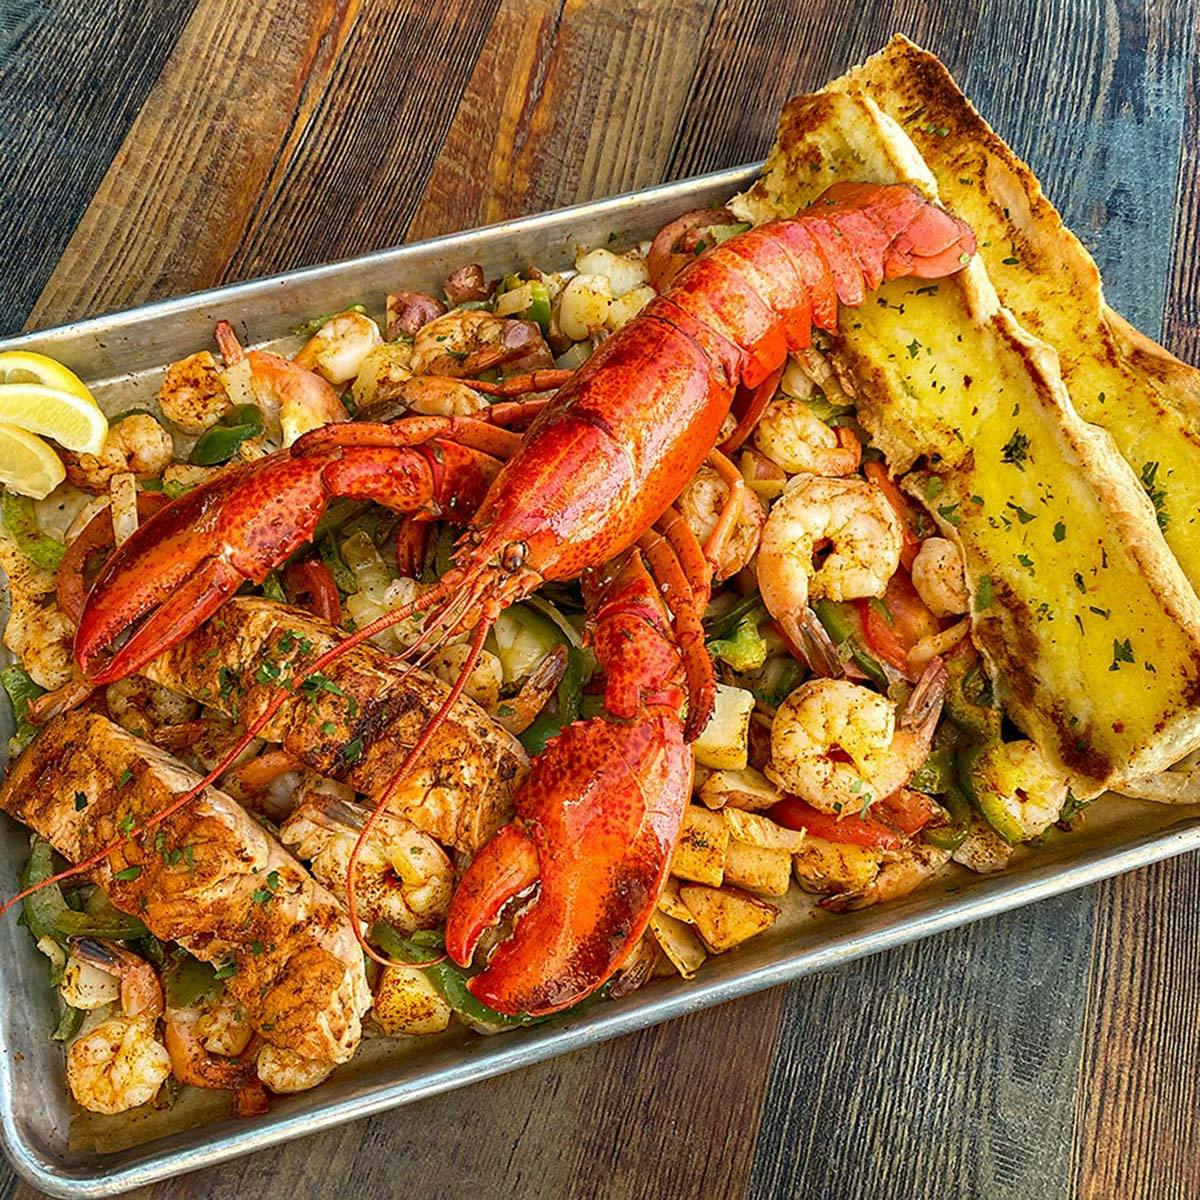 Super Seafood Tray for 4-6